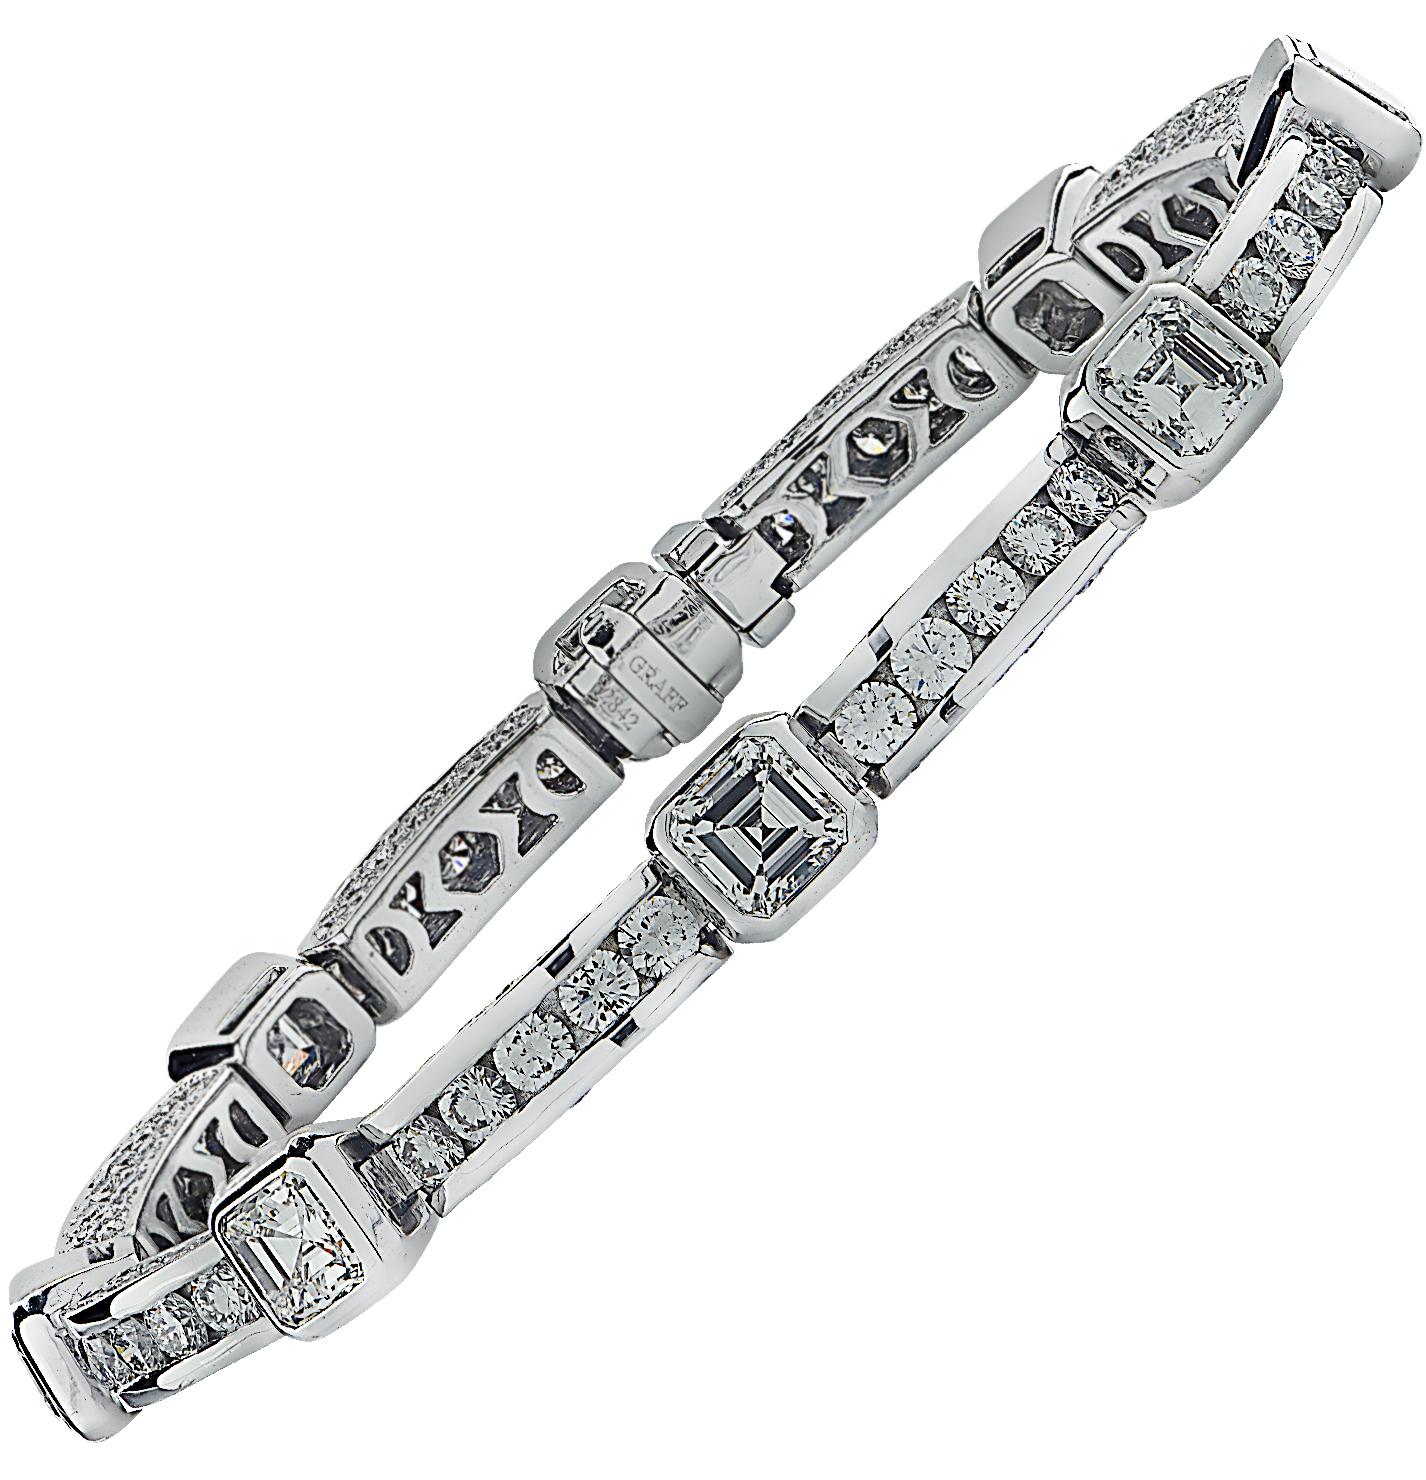 From the renowned House of Graff, this sensational bracelet is finely crafted in Platinum, and showcases 8 spectacular Ascher Cut Diamonds weighing 6.04 carats, D-F color, VVS-VS Clarity, and 280 round brilliant cut diamonds weighing 8.73 carats